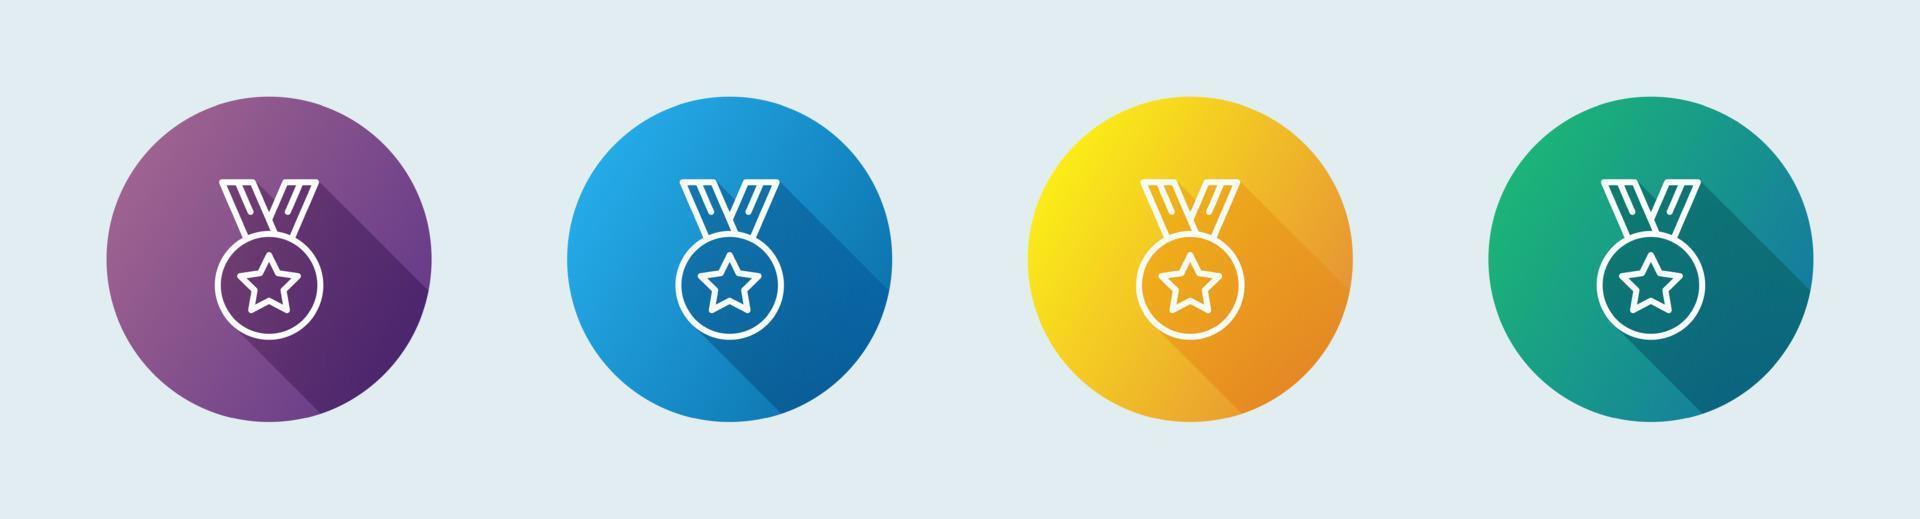 Medal line icon in flat design style. Award signs vector illustration.